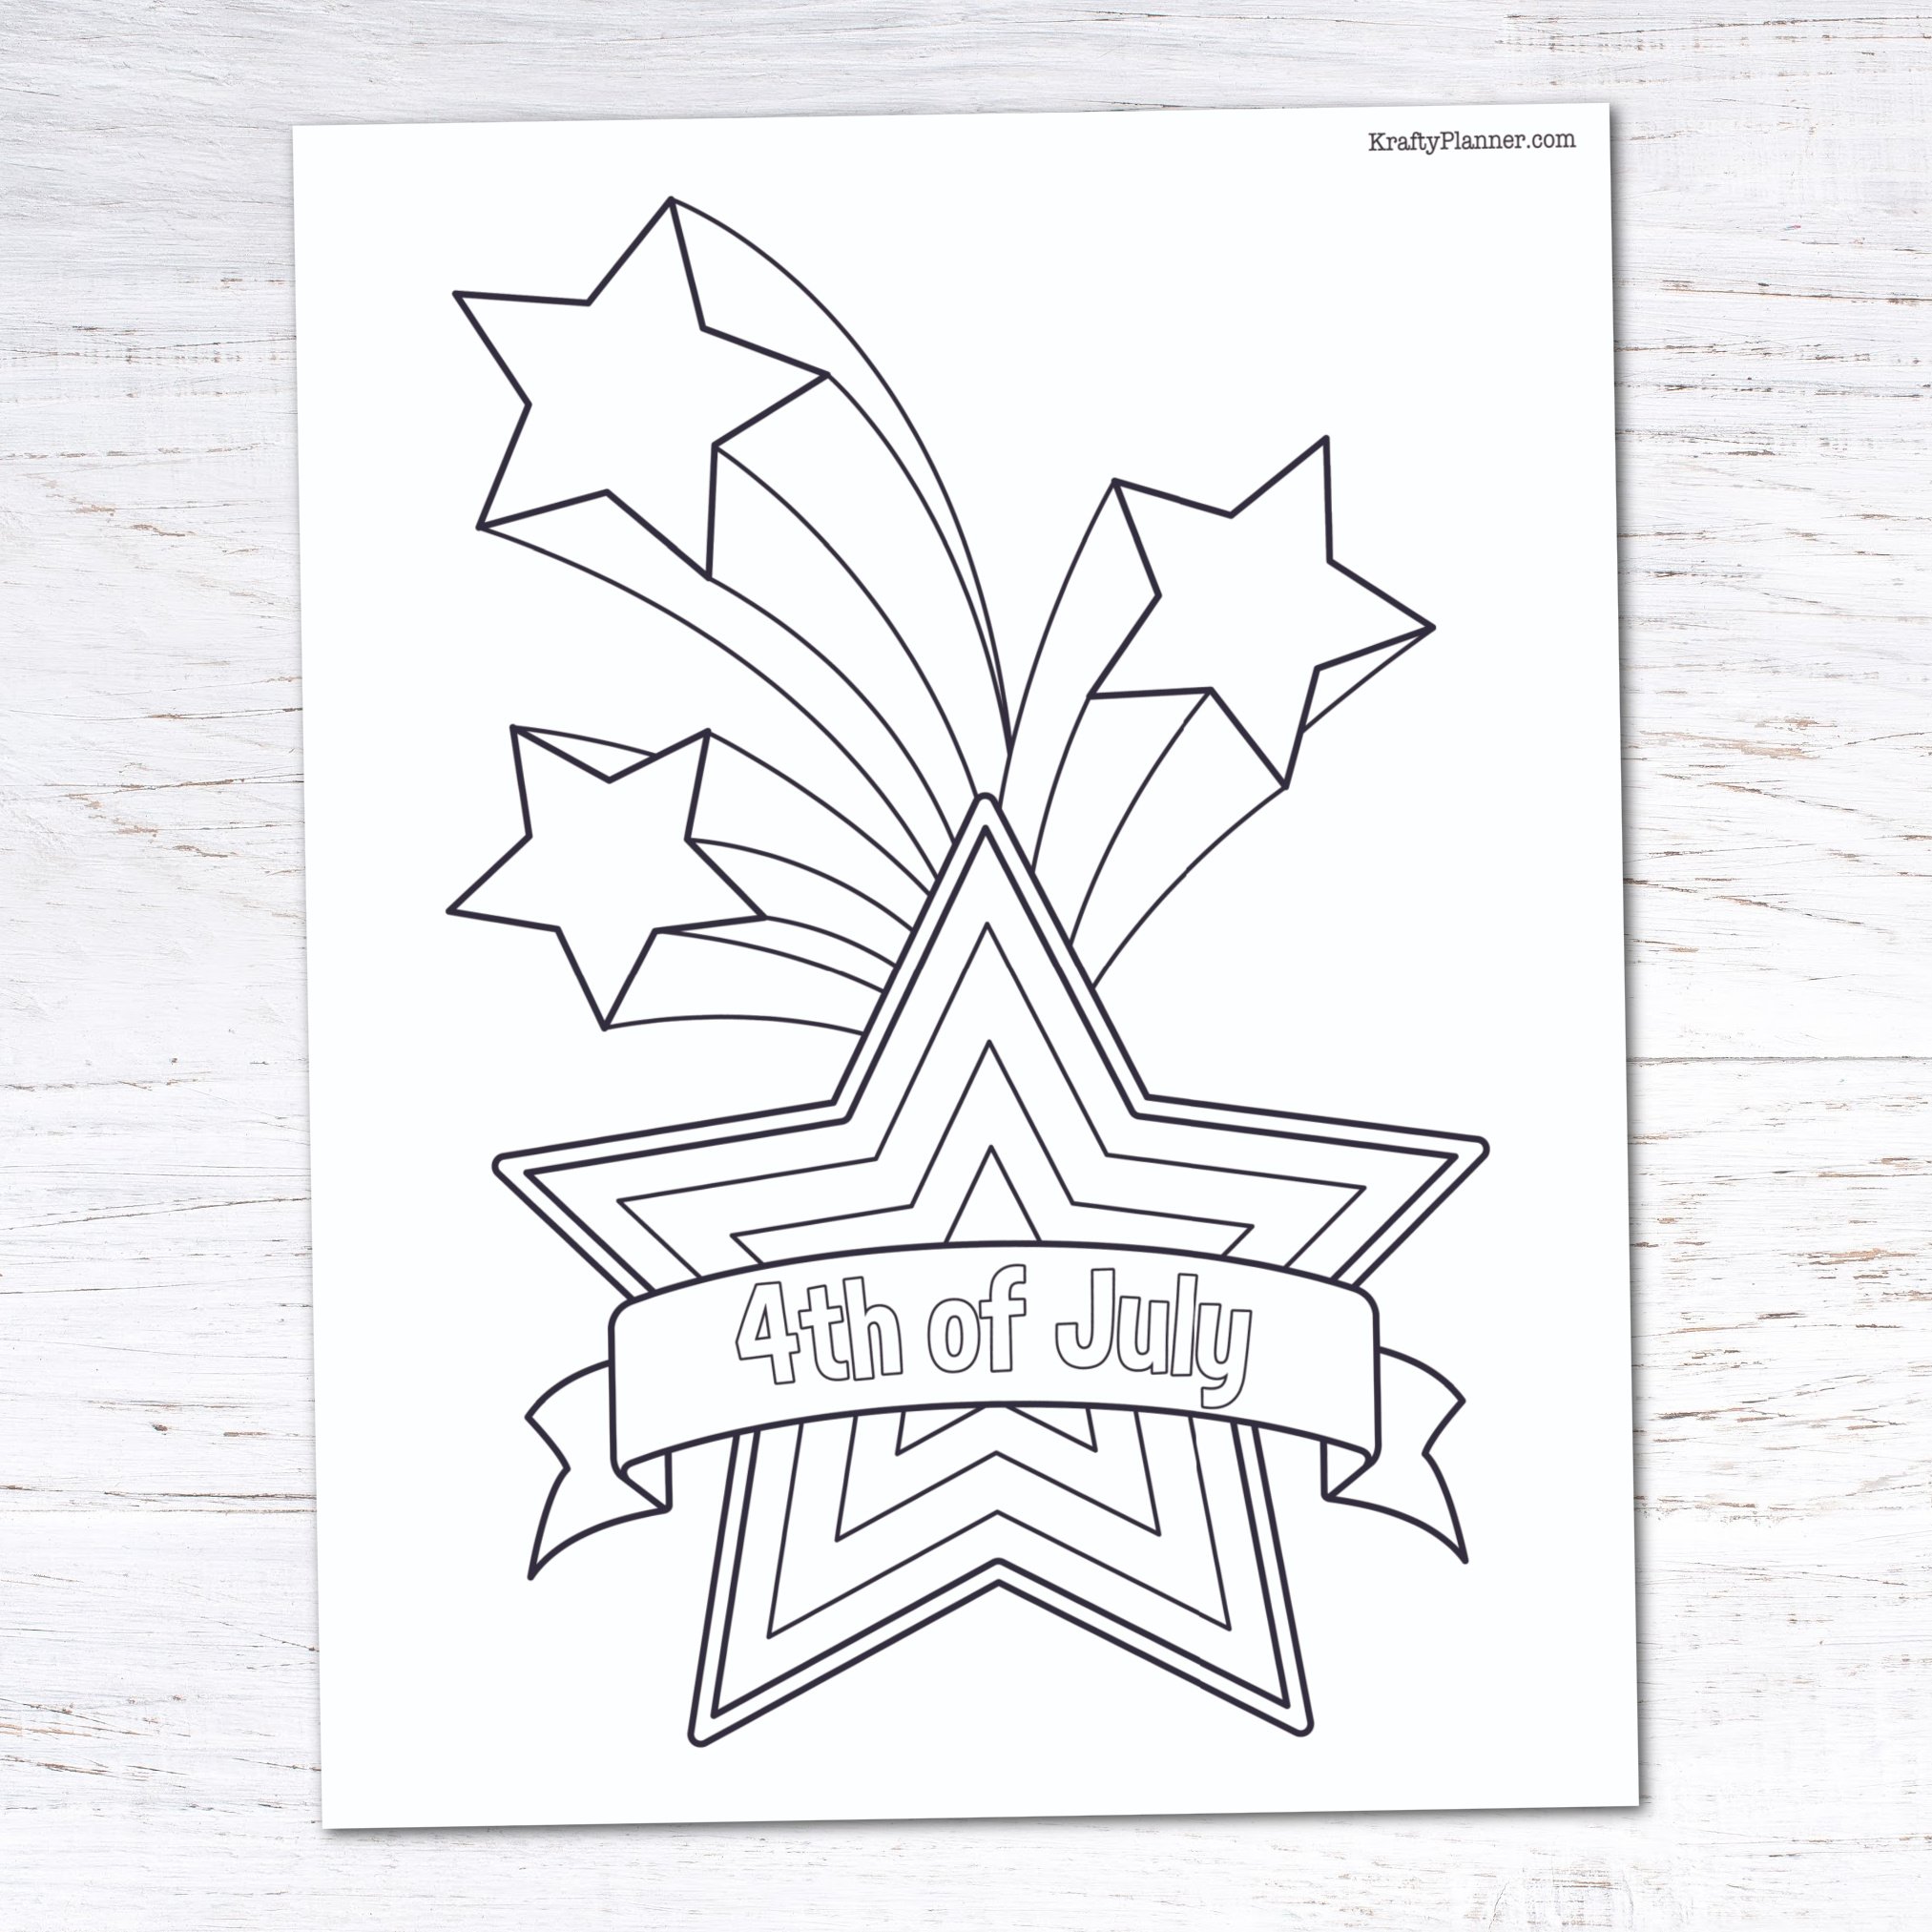 Free Printable 4th of July Coloring Pages - Stars.jpg